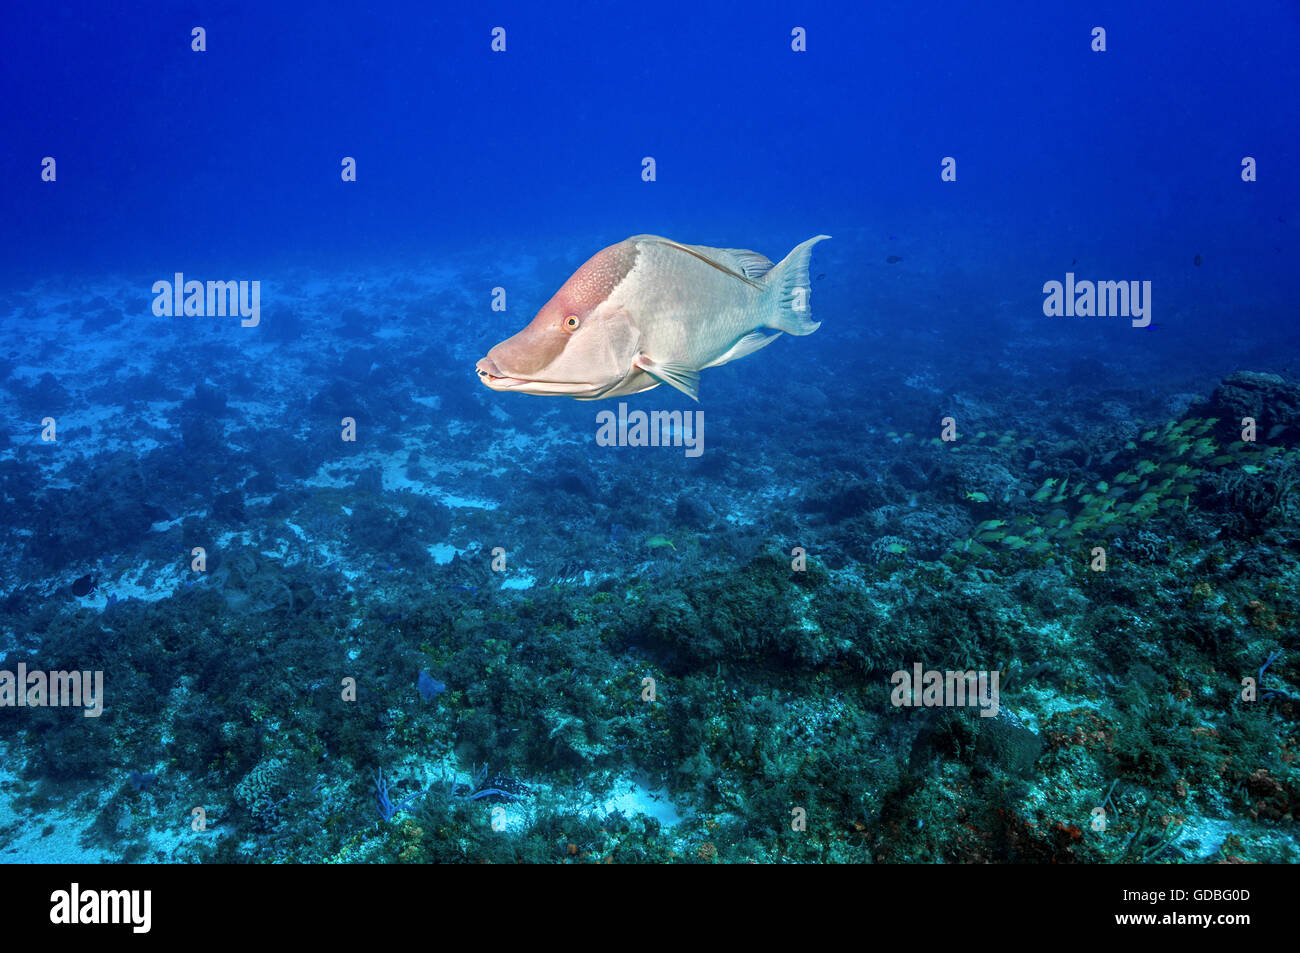 A large Hogfish swims over the reef Stock Photo